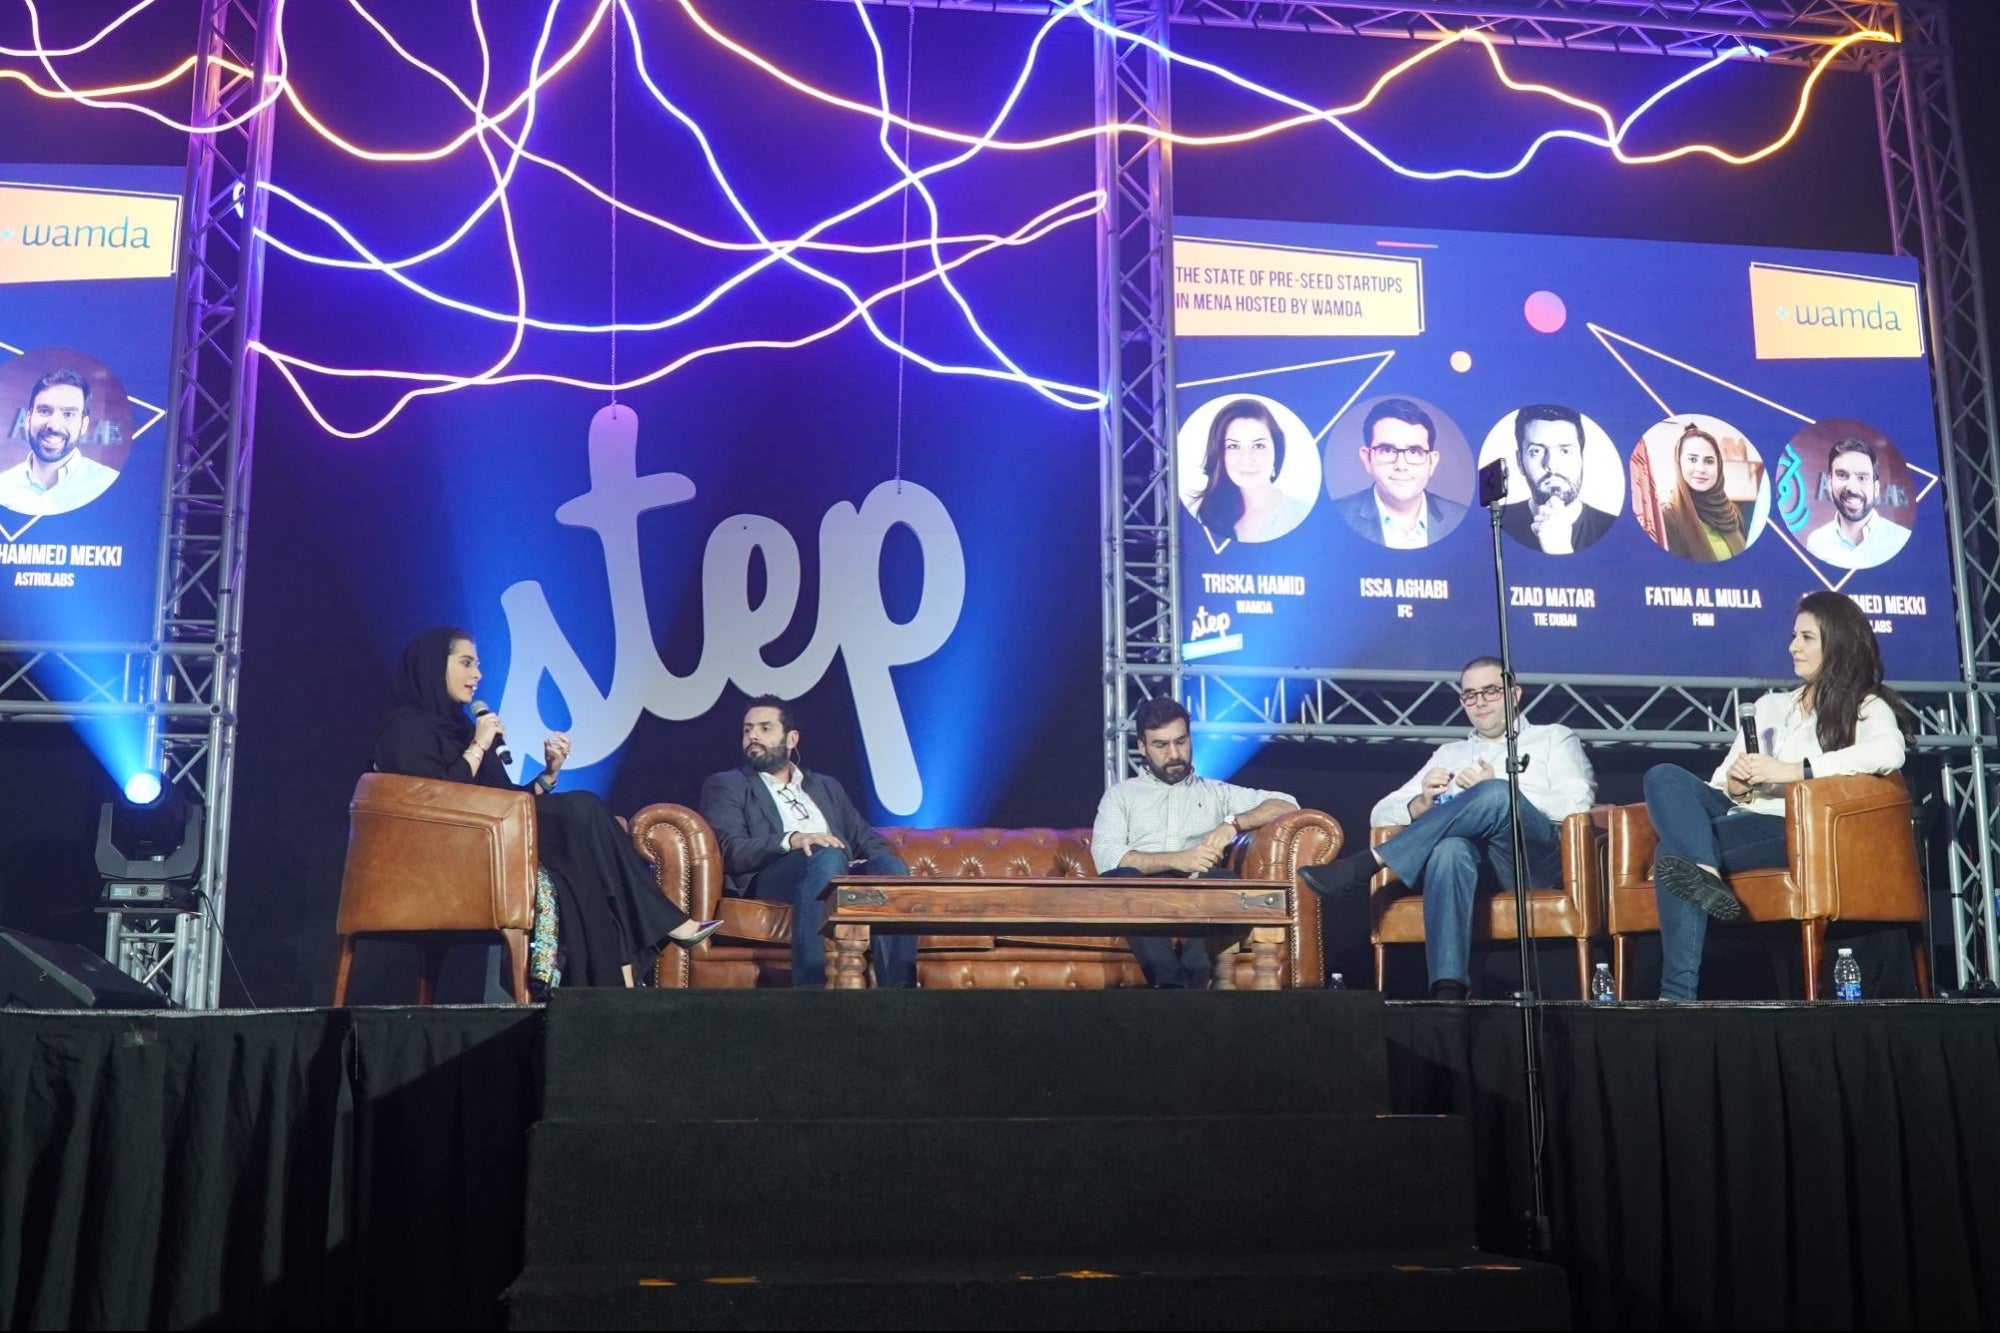 Step Conference Returns To Dubai Internet City For Its 11th Edition Running From February 22-23, 2023